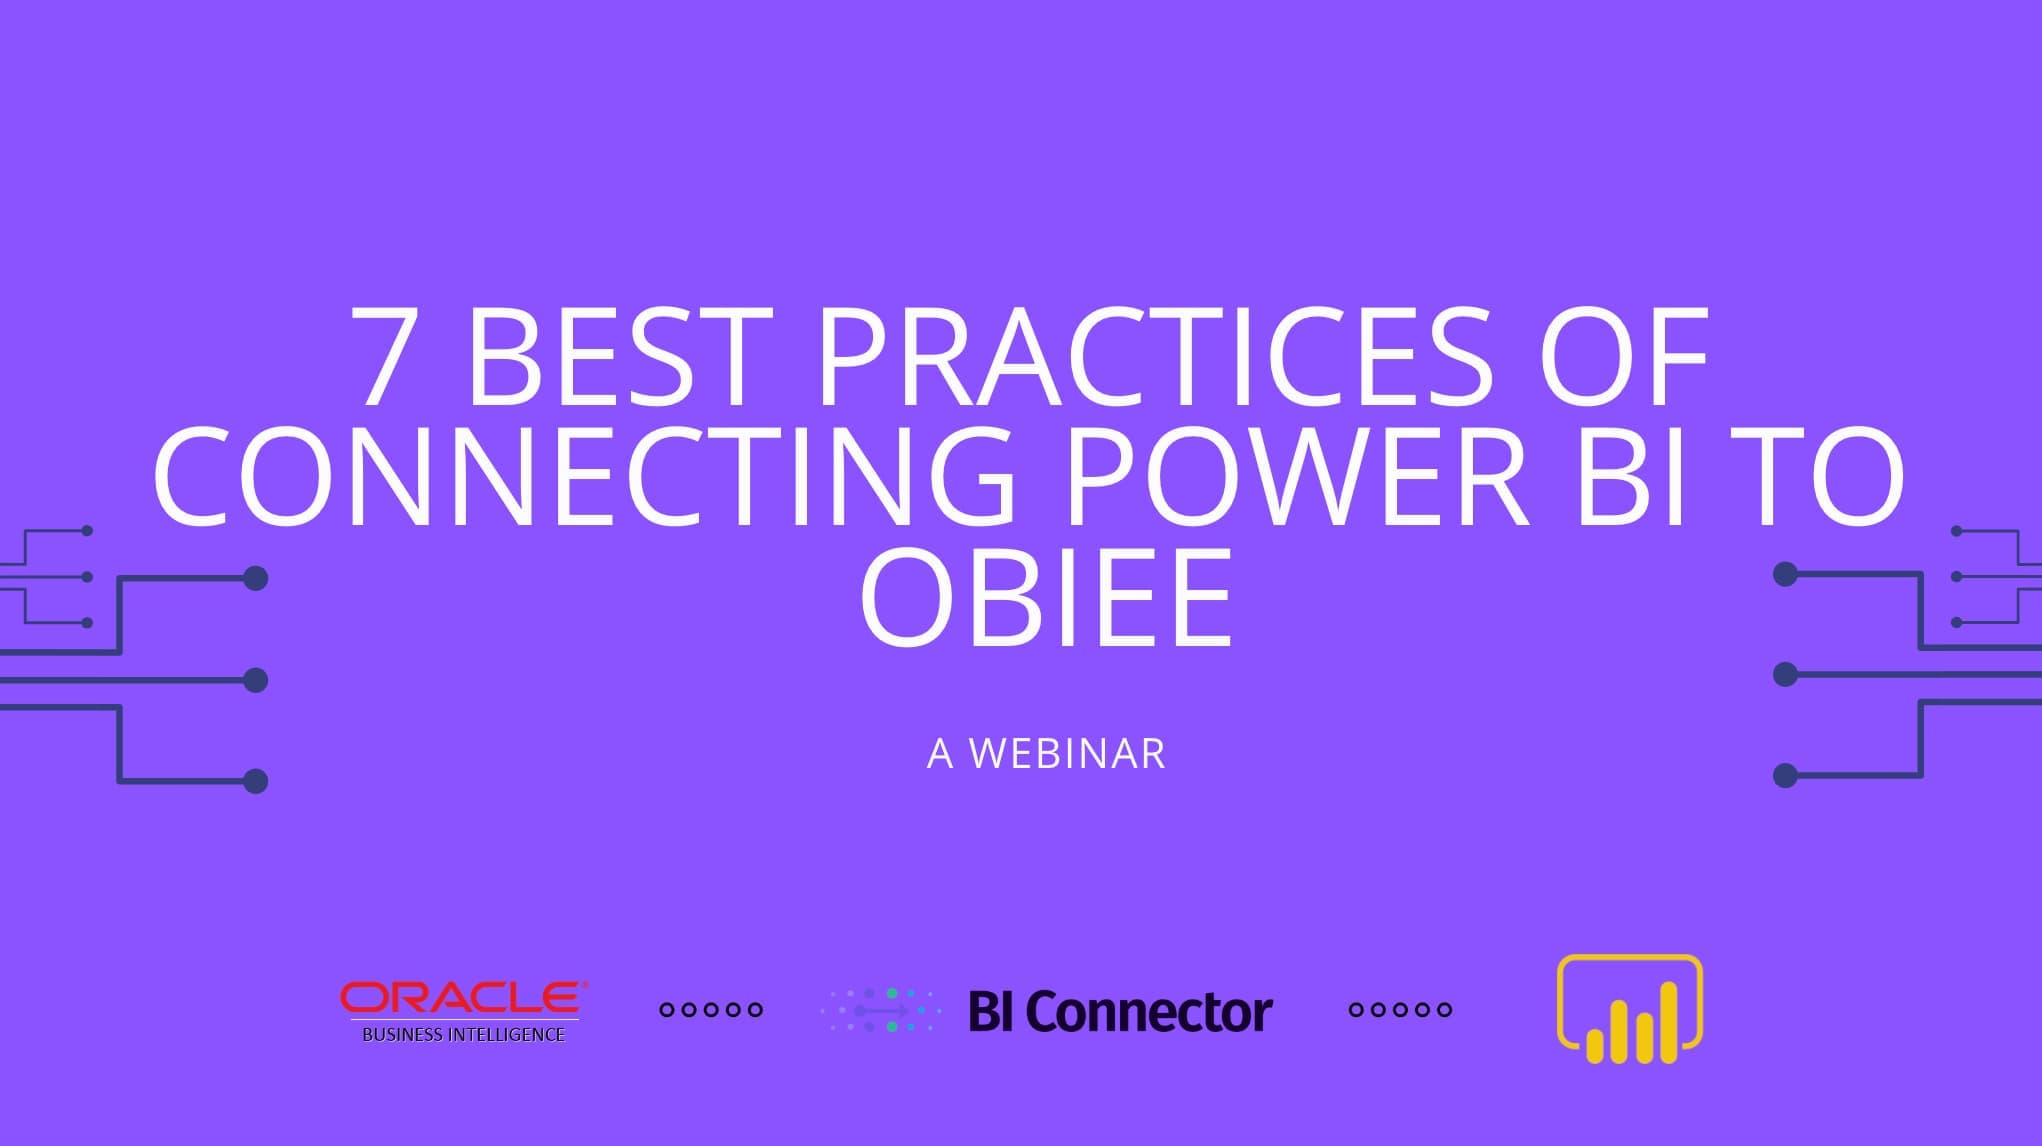 7 best practices of connecting power bi to obiee